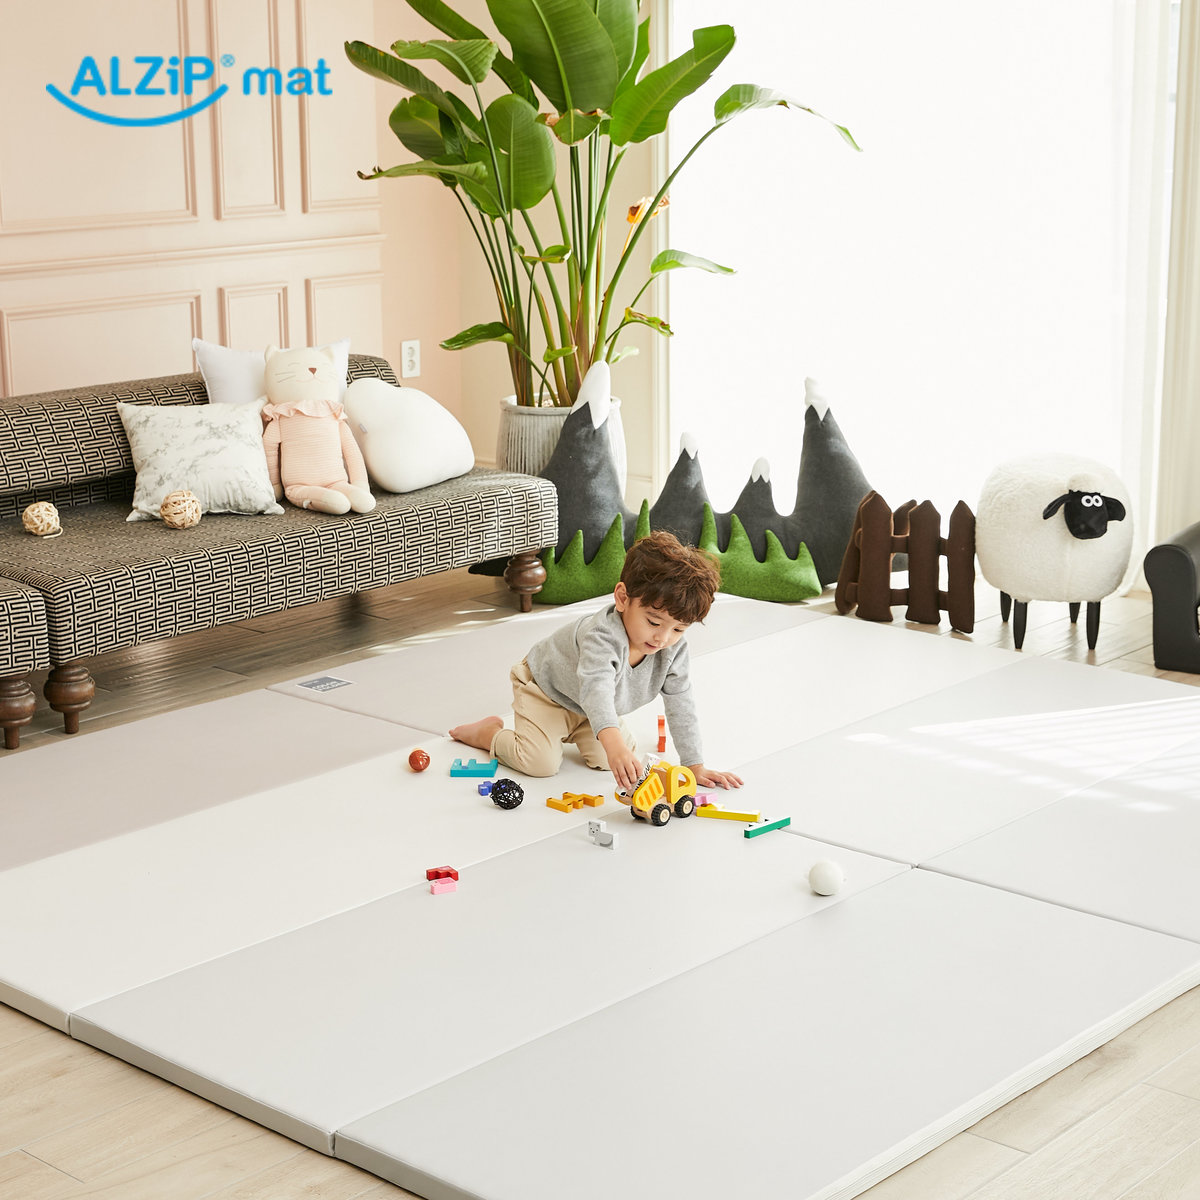 Certified Non Toxic Thick and Large ALZIP Folding Baby Play Mat Tummy time and Noise Reduction Perfect for Crawling S: 200x120cm, Deluxe: Blush 